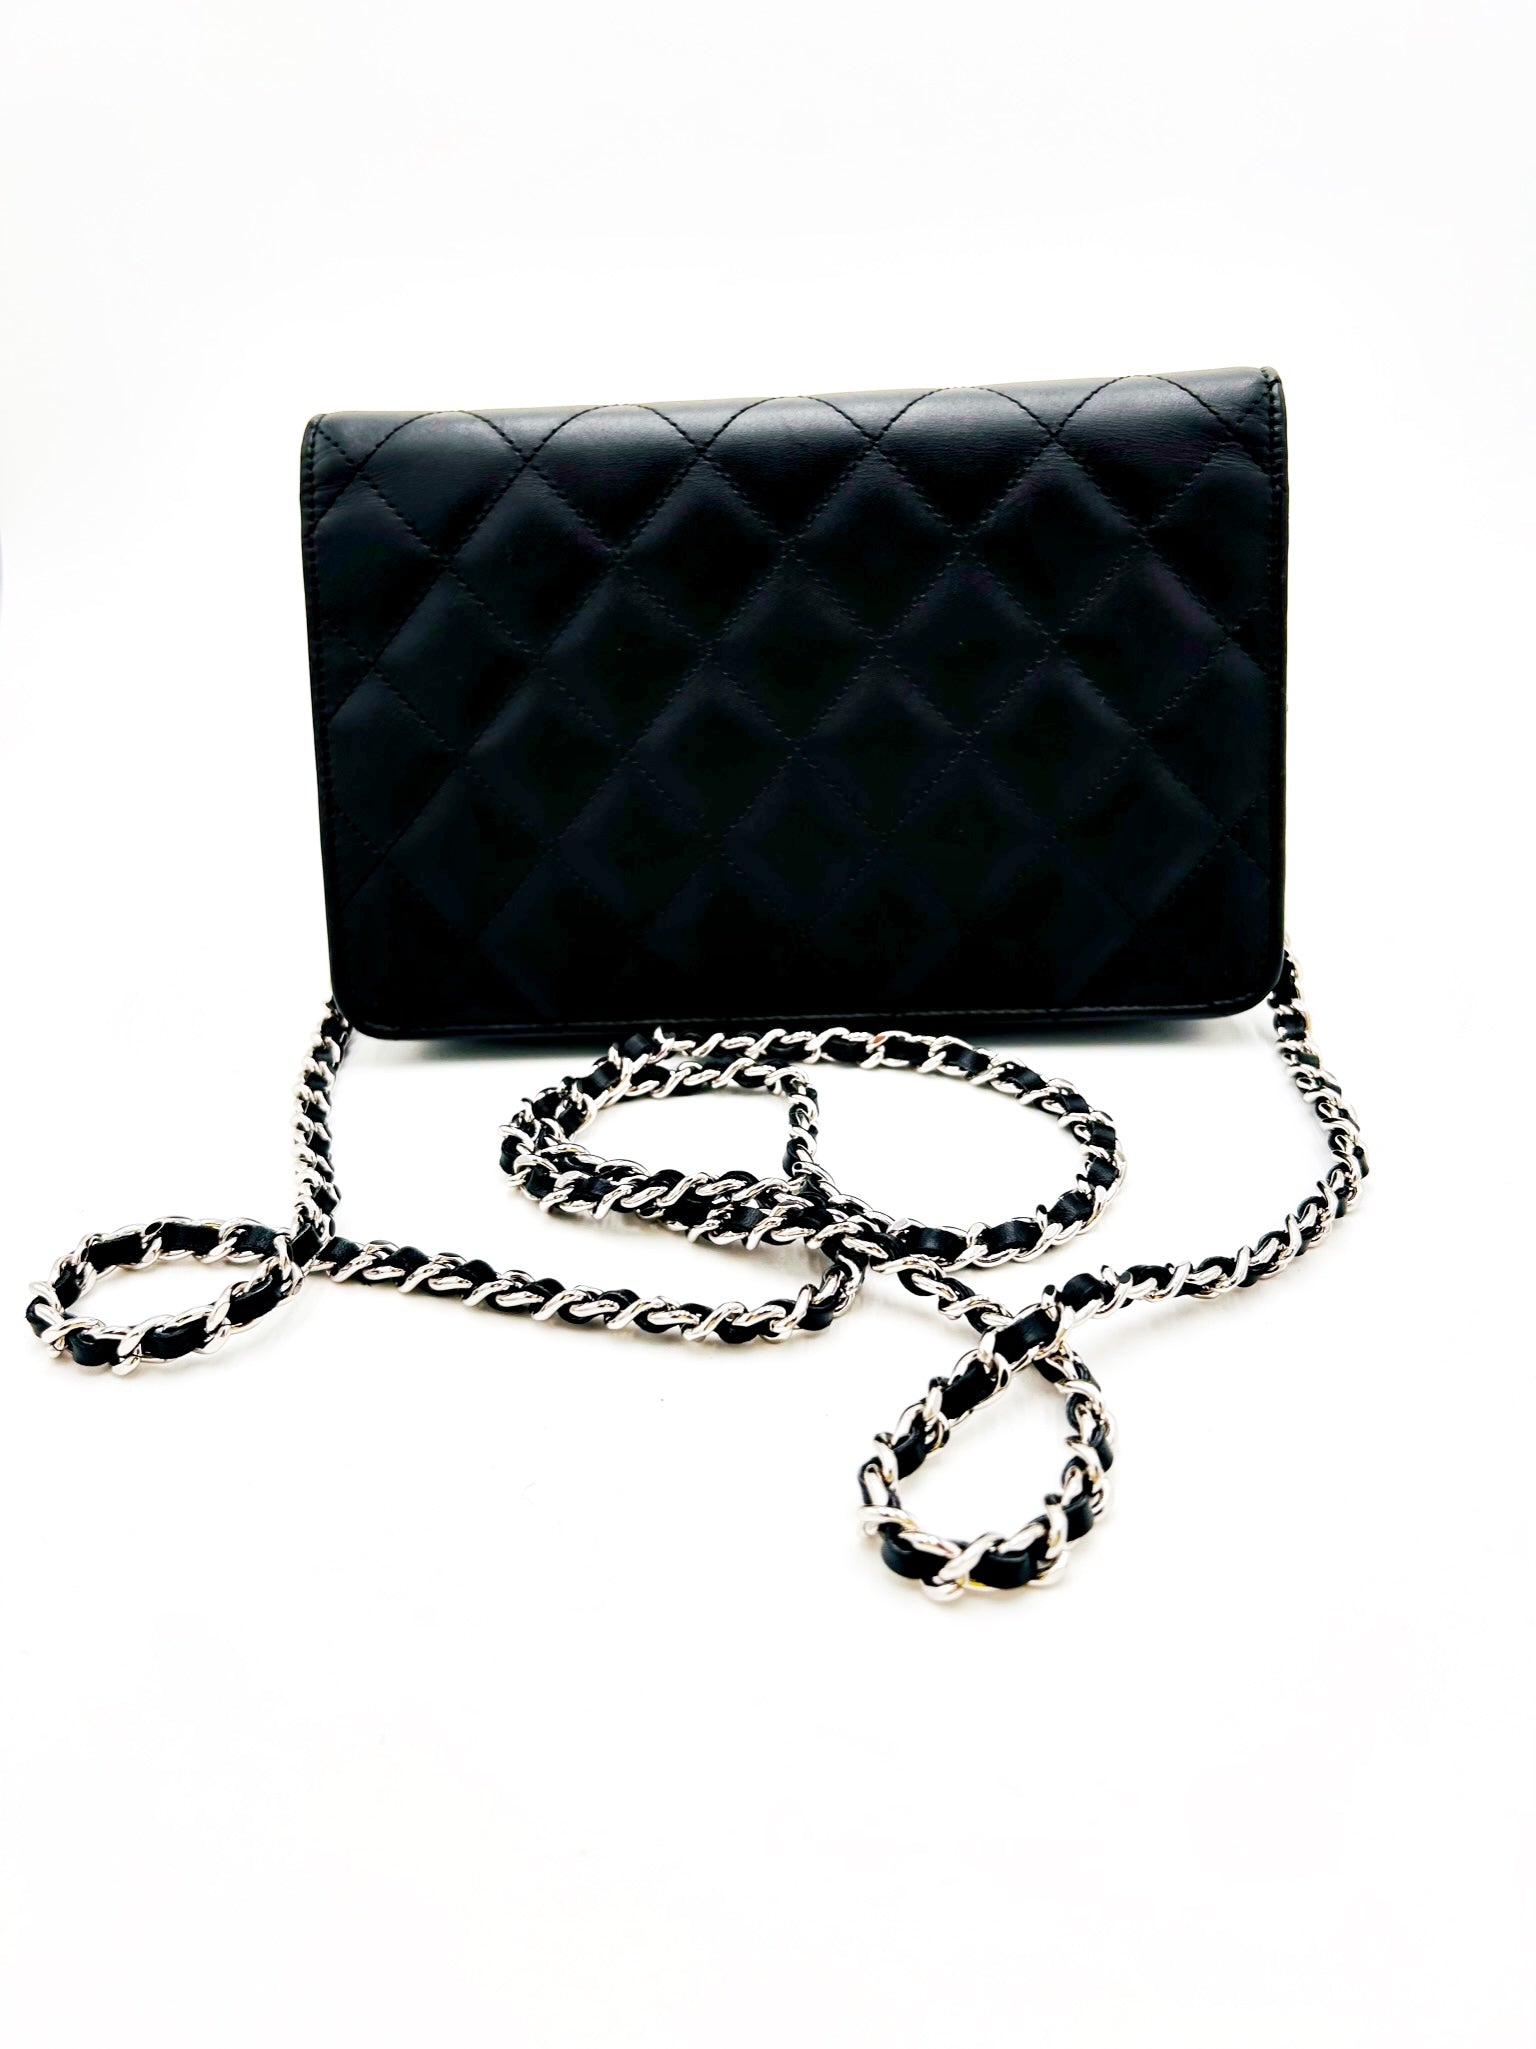 CHANEL BLACK WOC (WALLET ON A CHAIN)